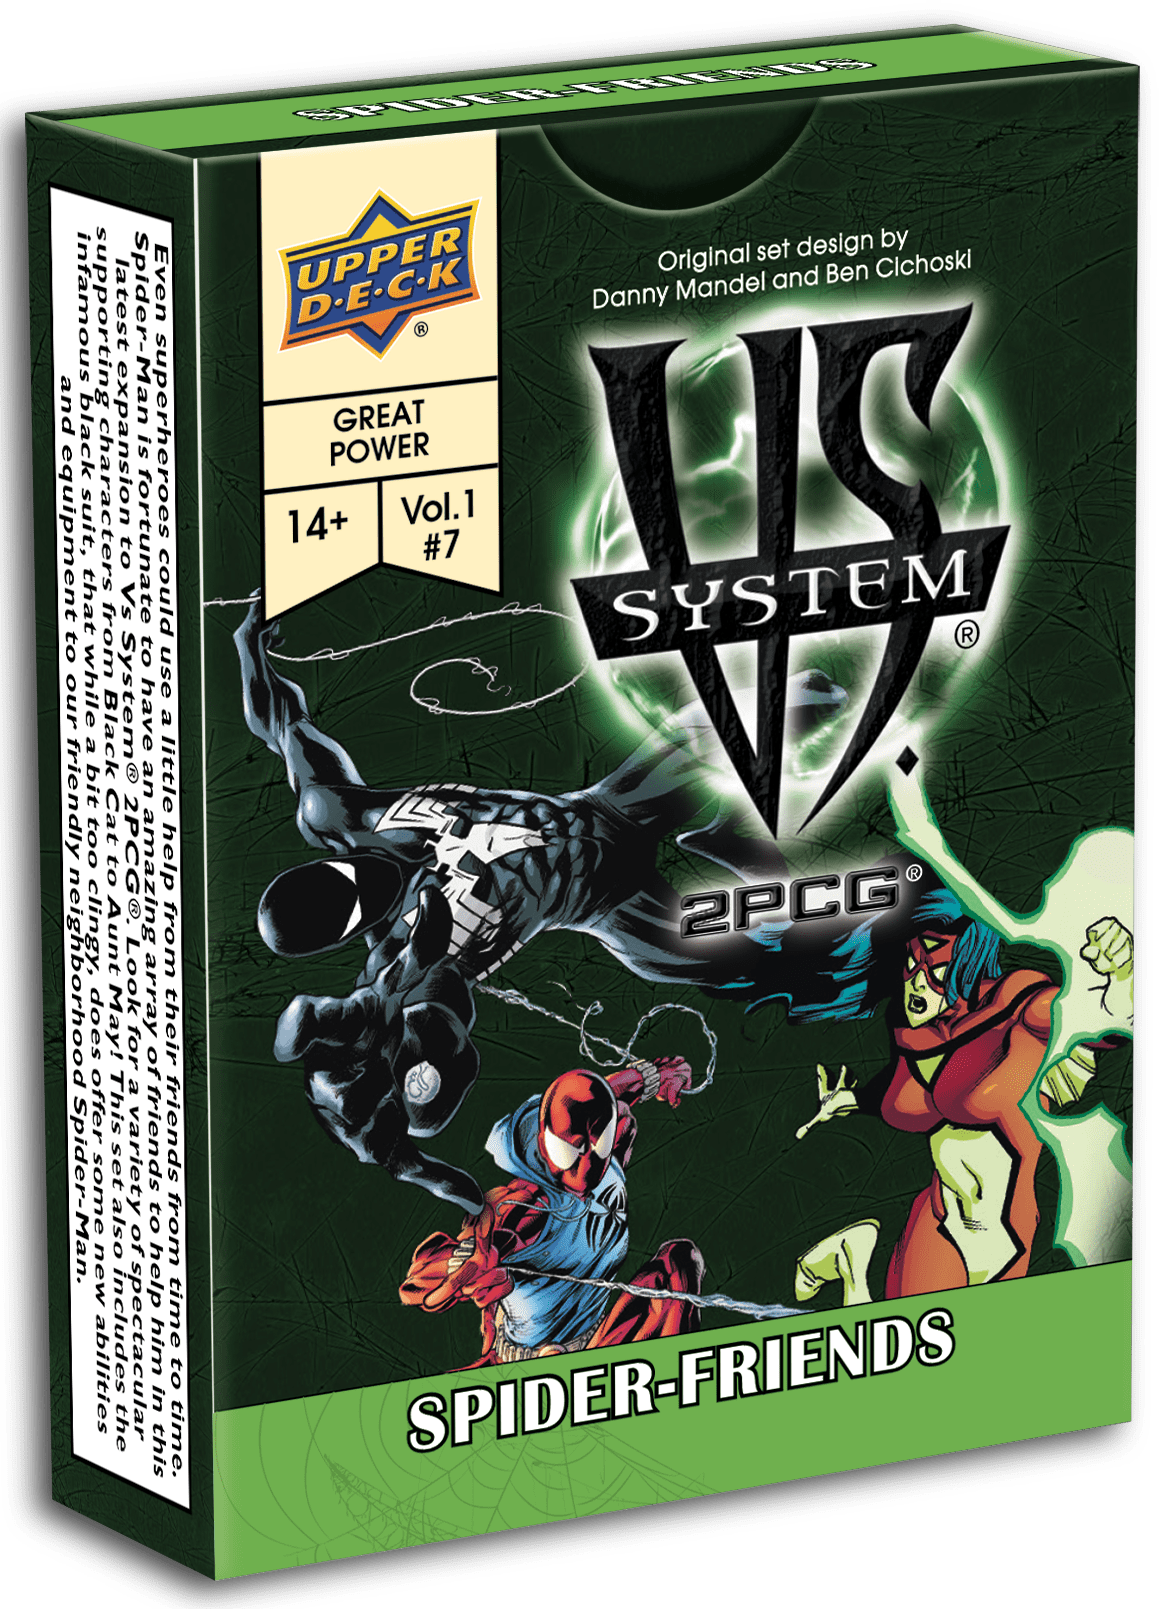 Vs System 2PCG: Spider-Friends